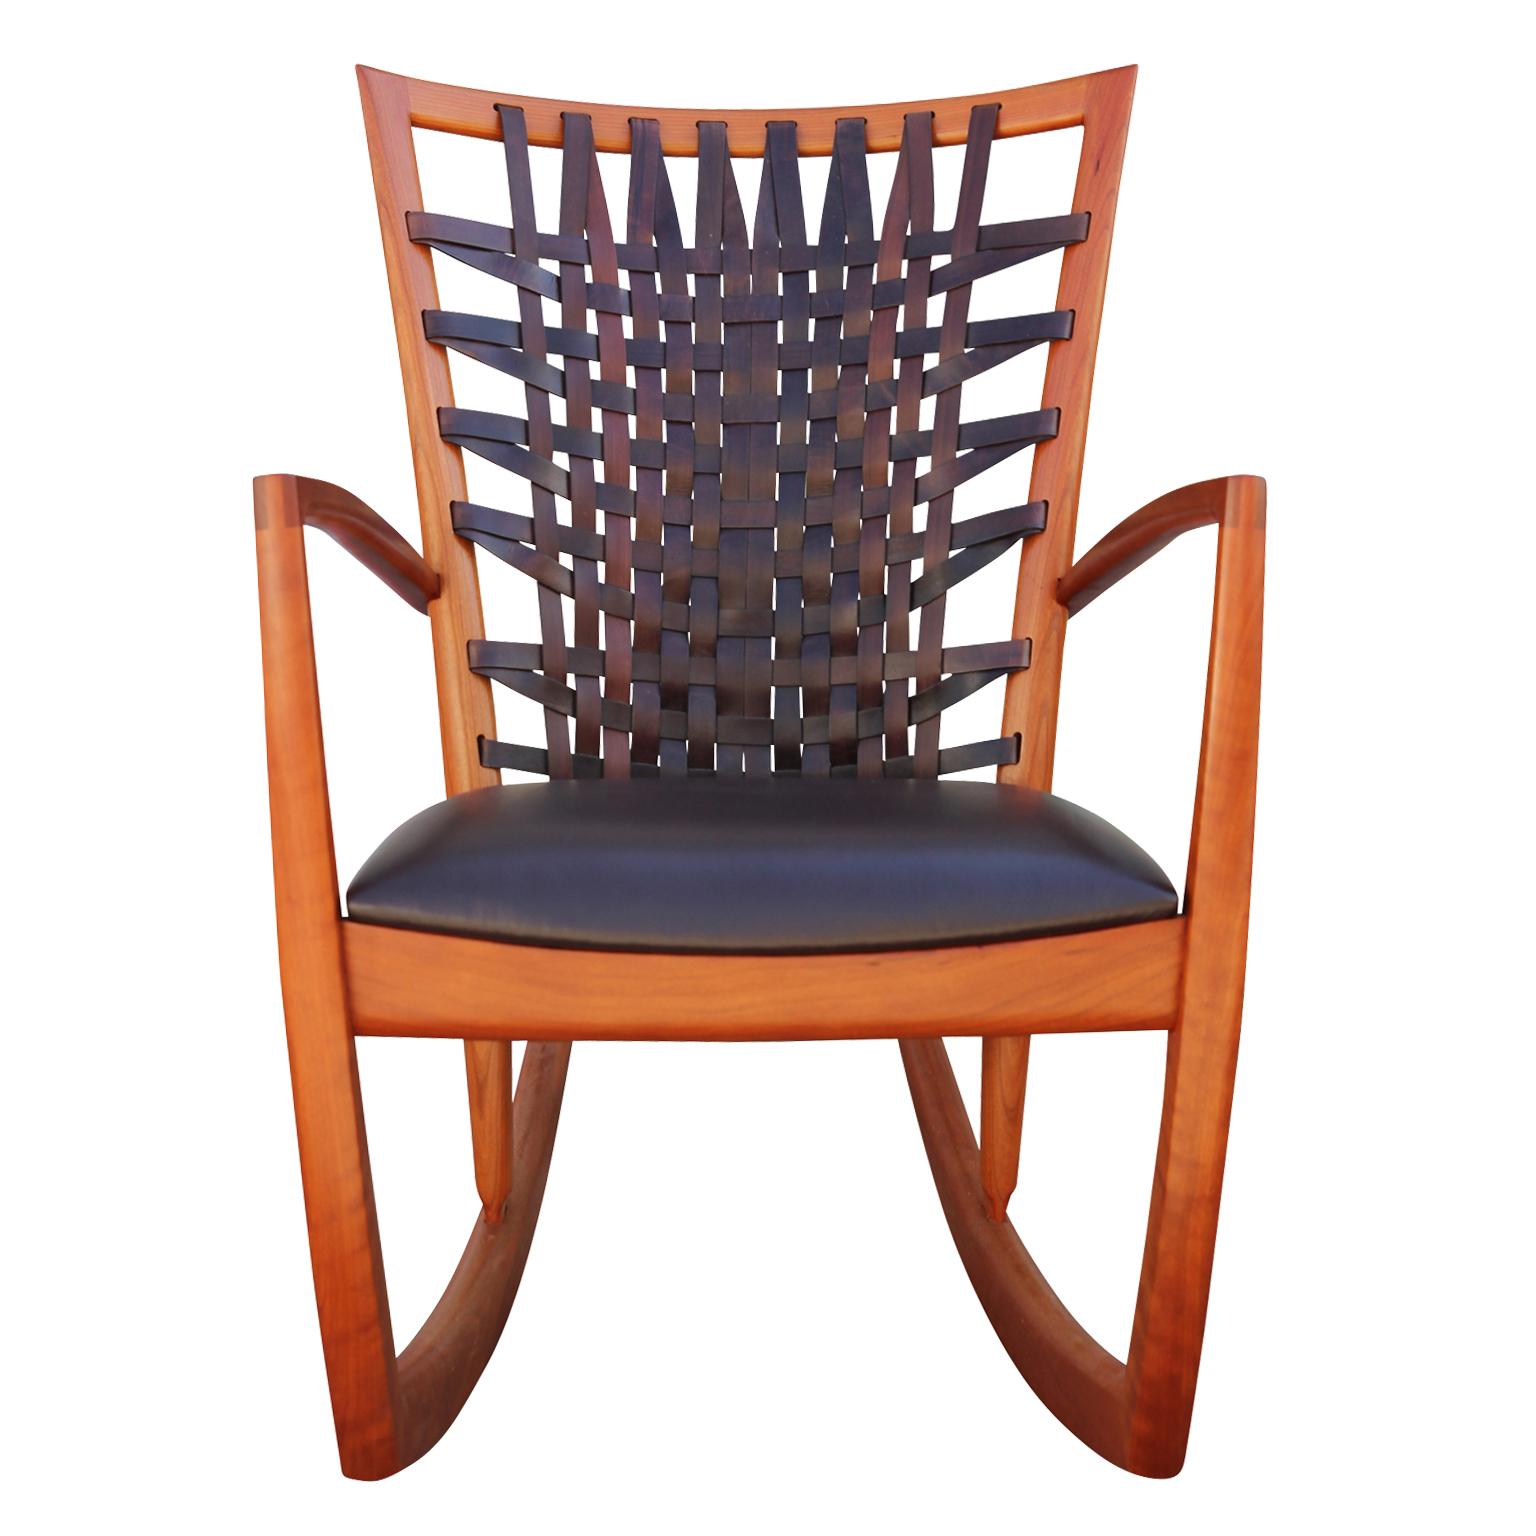 American Pair of Sculptural Modern Handmade Cherrywood and Woven Leather Rocking Chairs